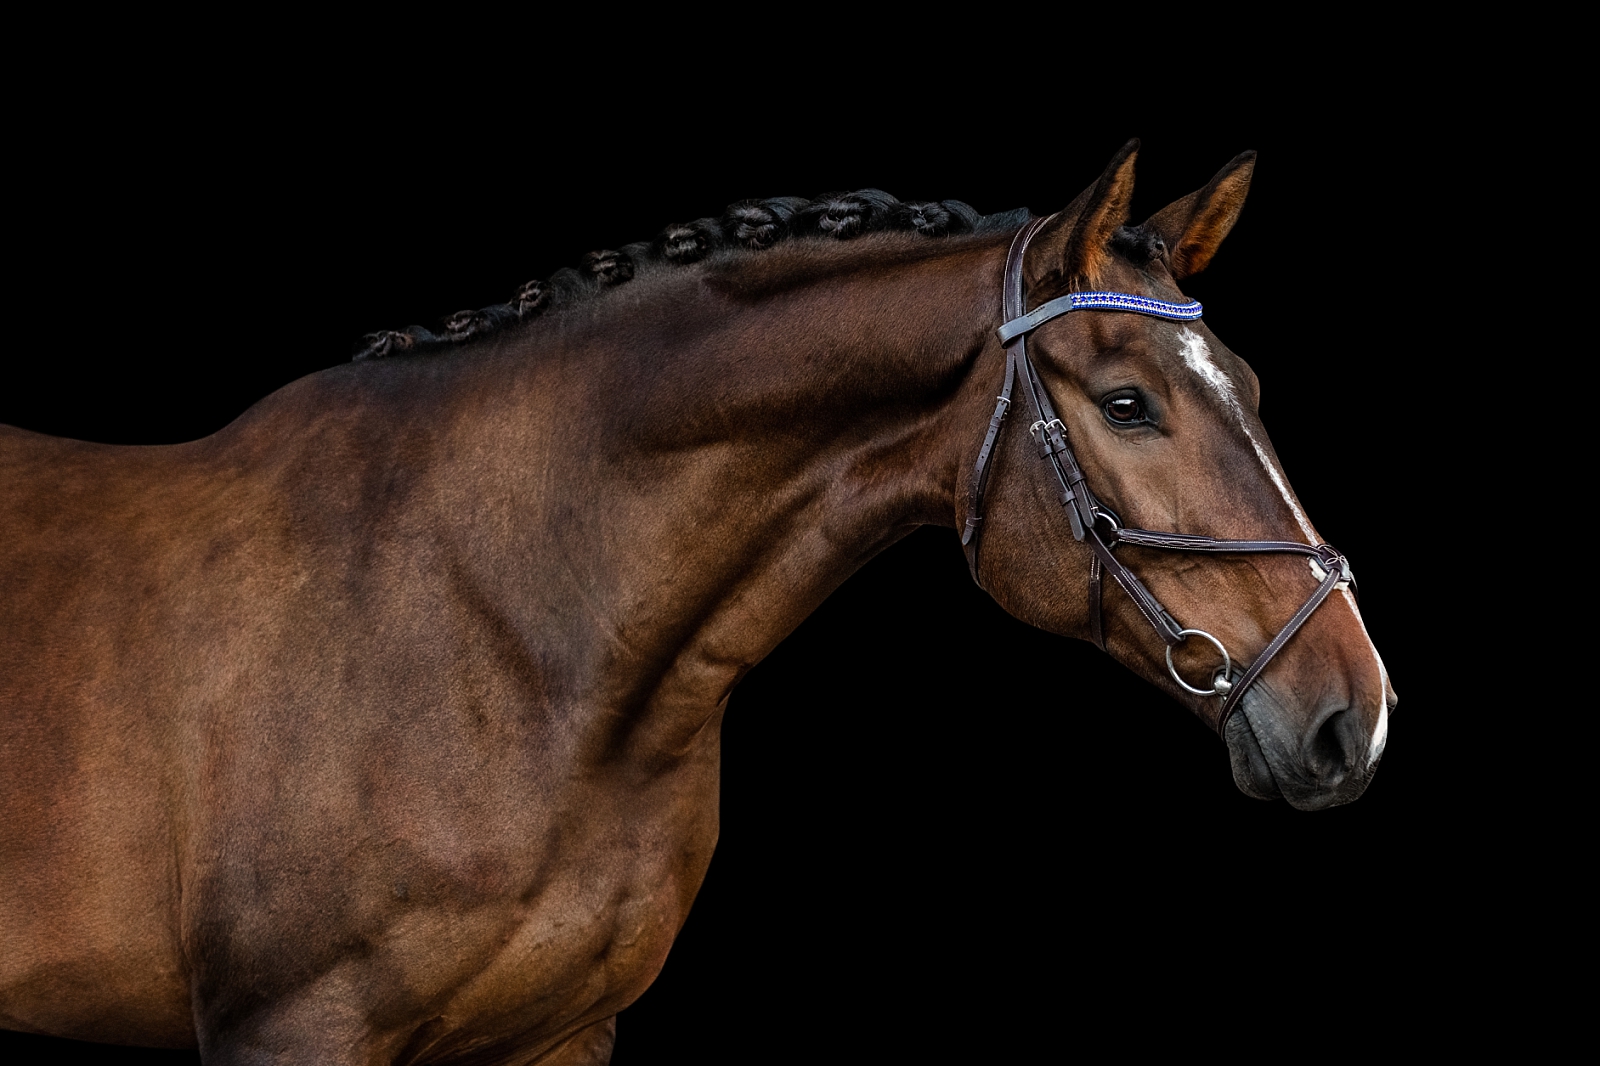 Quirador, photographed at Little Star Stables, Graceville, FL.